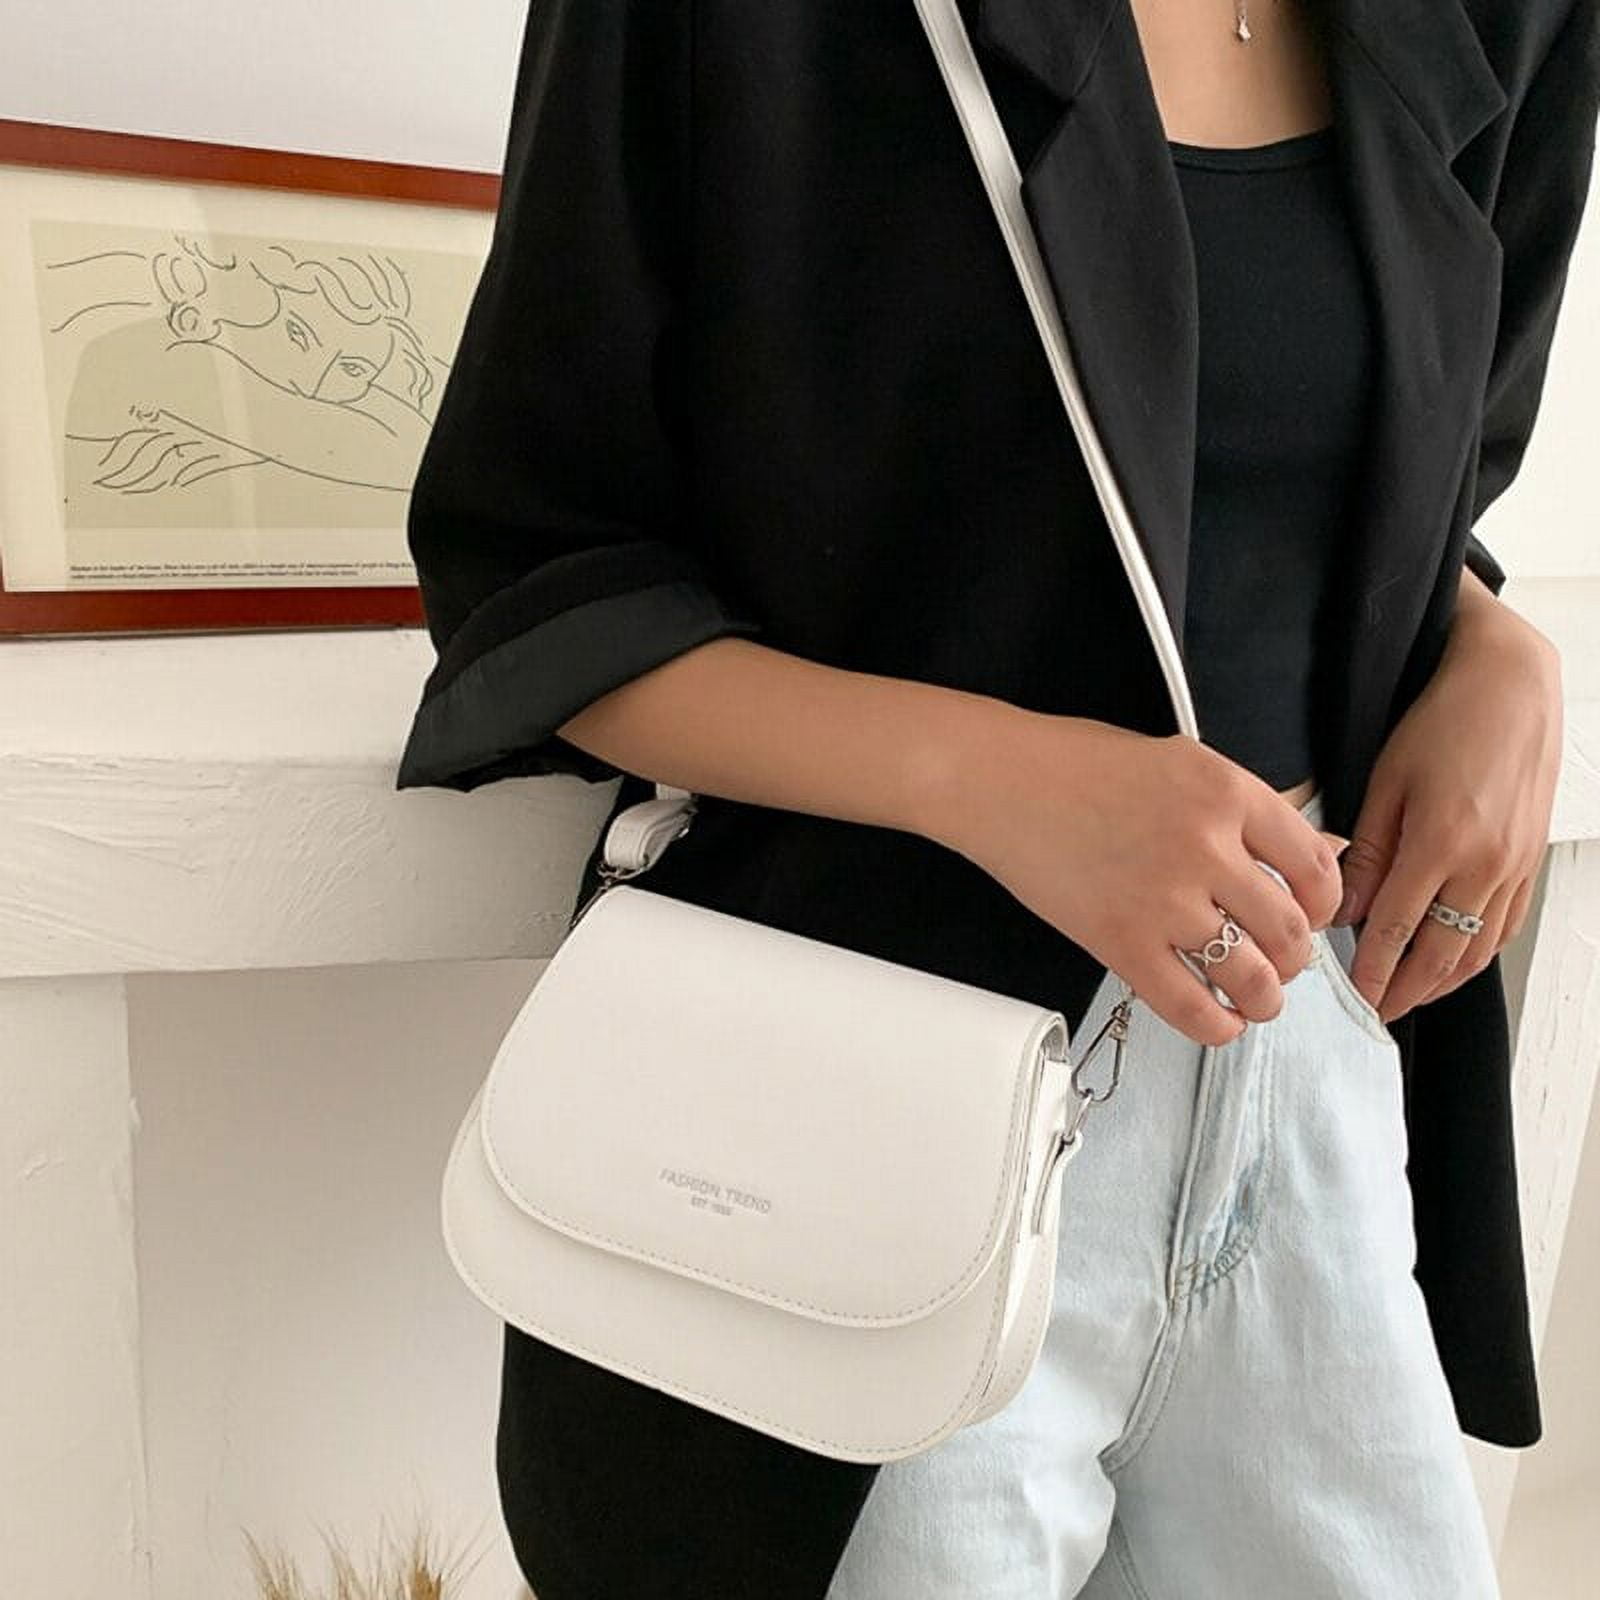 CoCopeaunt Womens Luxury Brand Shoulder Bags Leather Crossbody Bag Classic  Style Design Handbag Ladys New Small Messenger Bag 